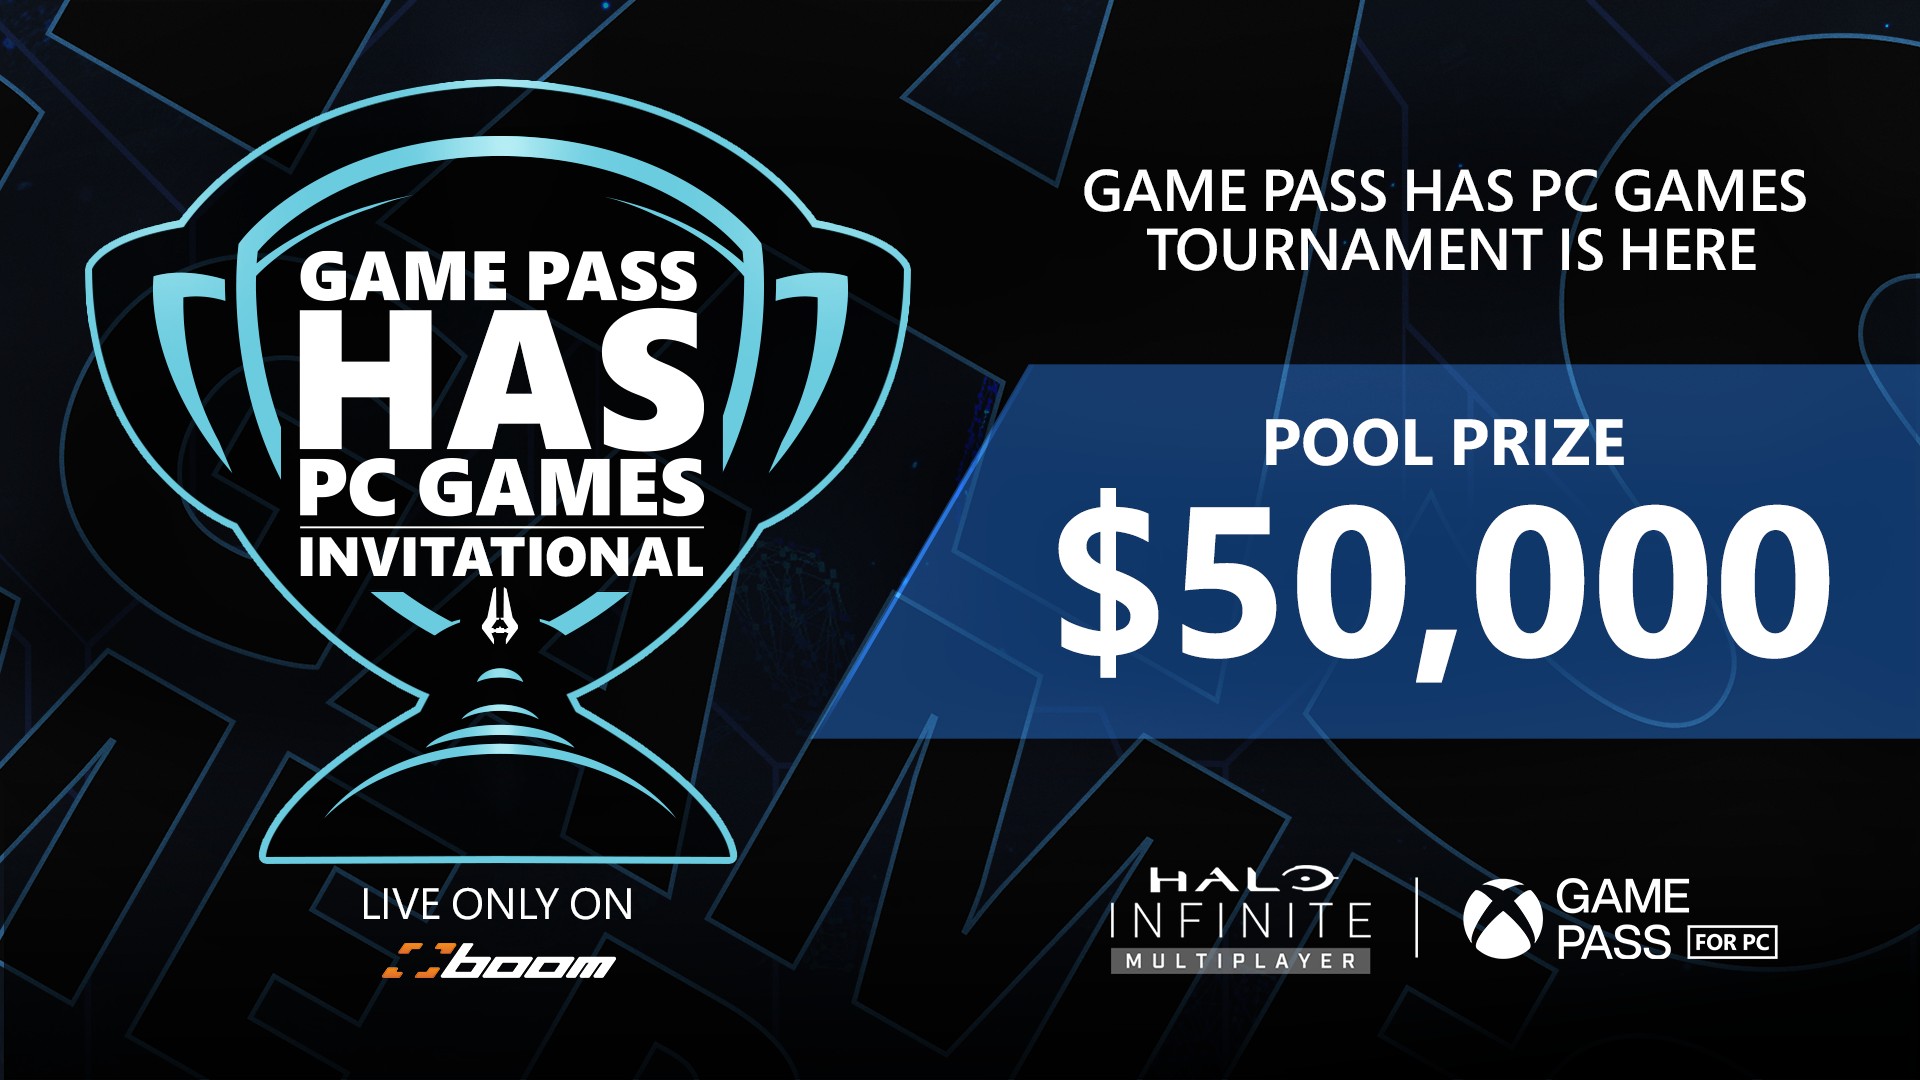 Game Pass Has PC Games Invitational with Boom TV Featuring Halo Infinite Multiplayer and a $50,000 Prize Pool